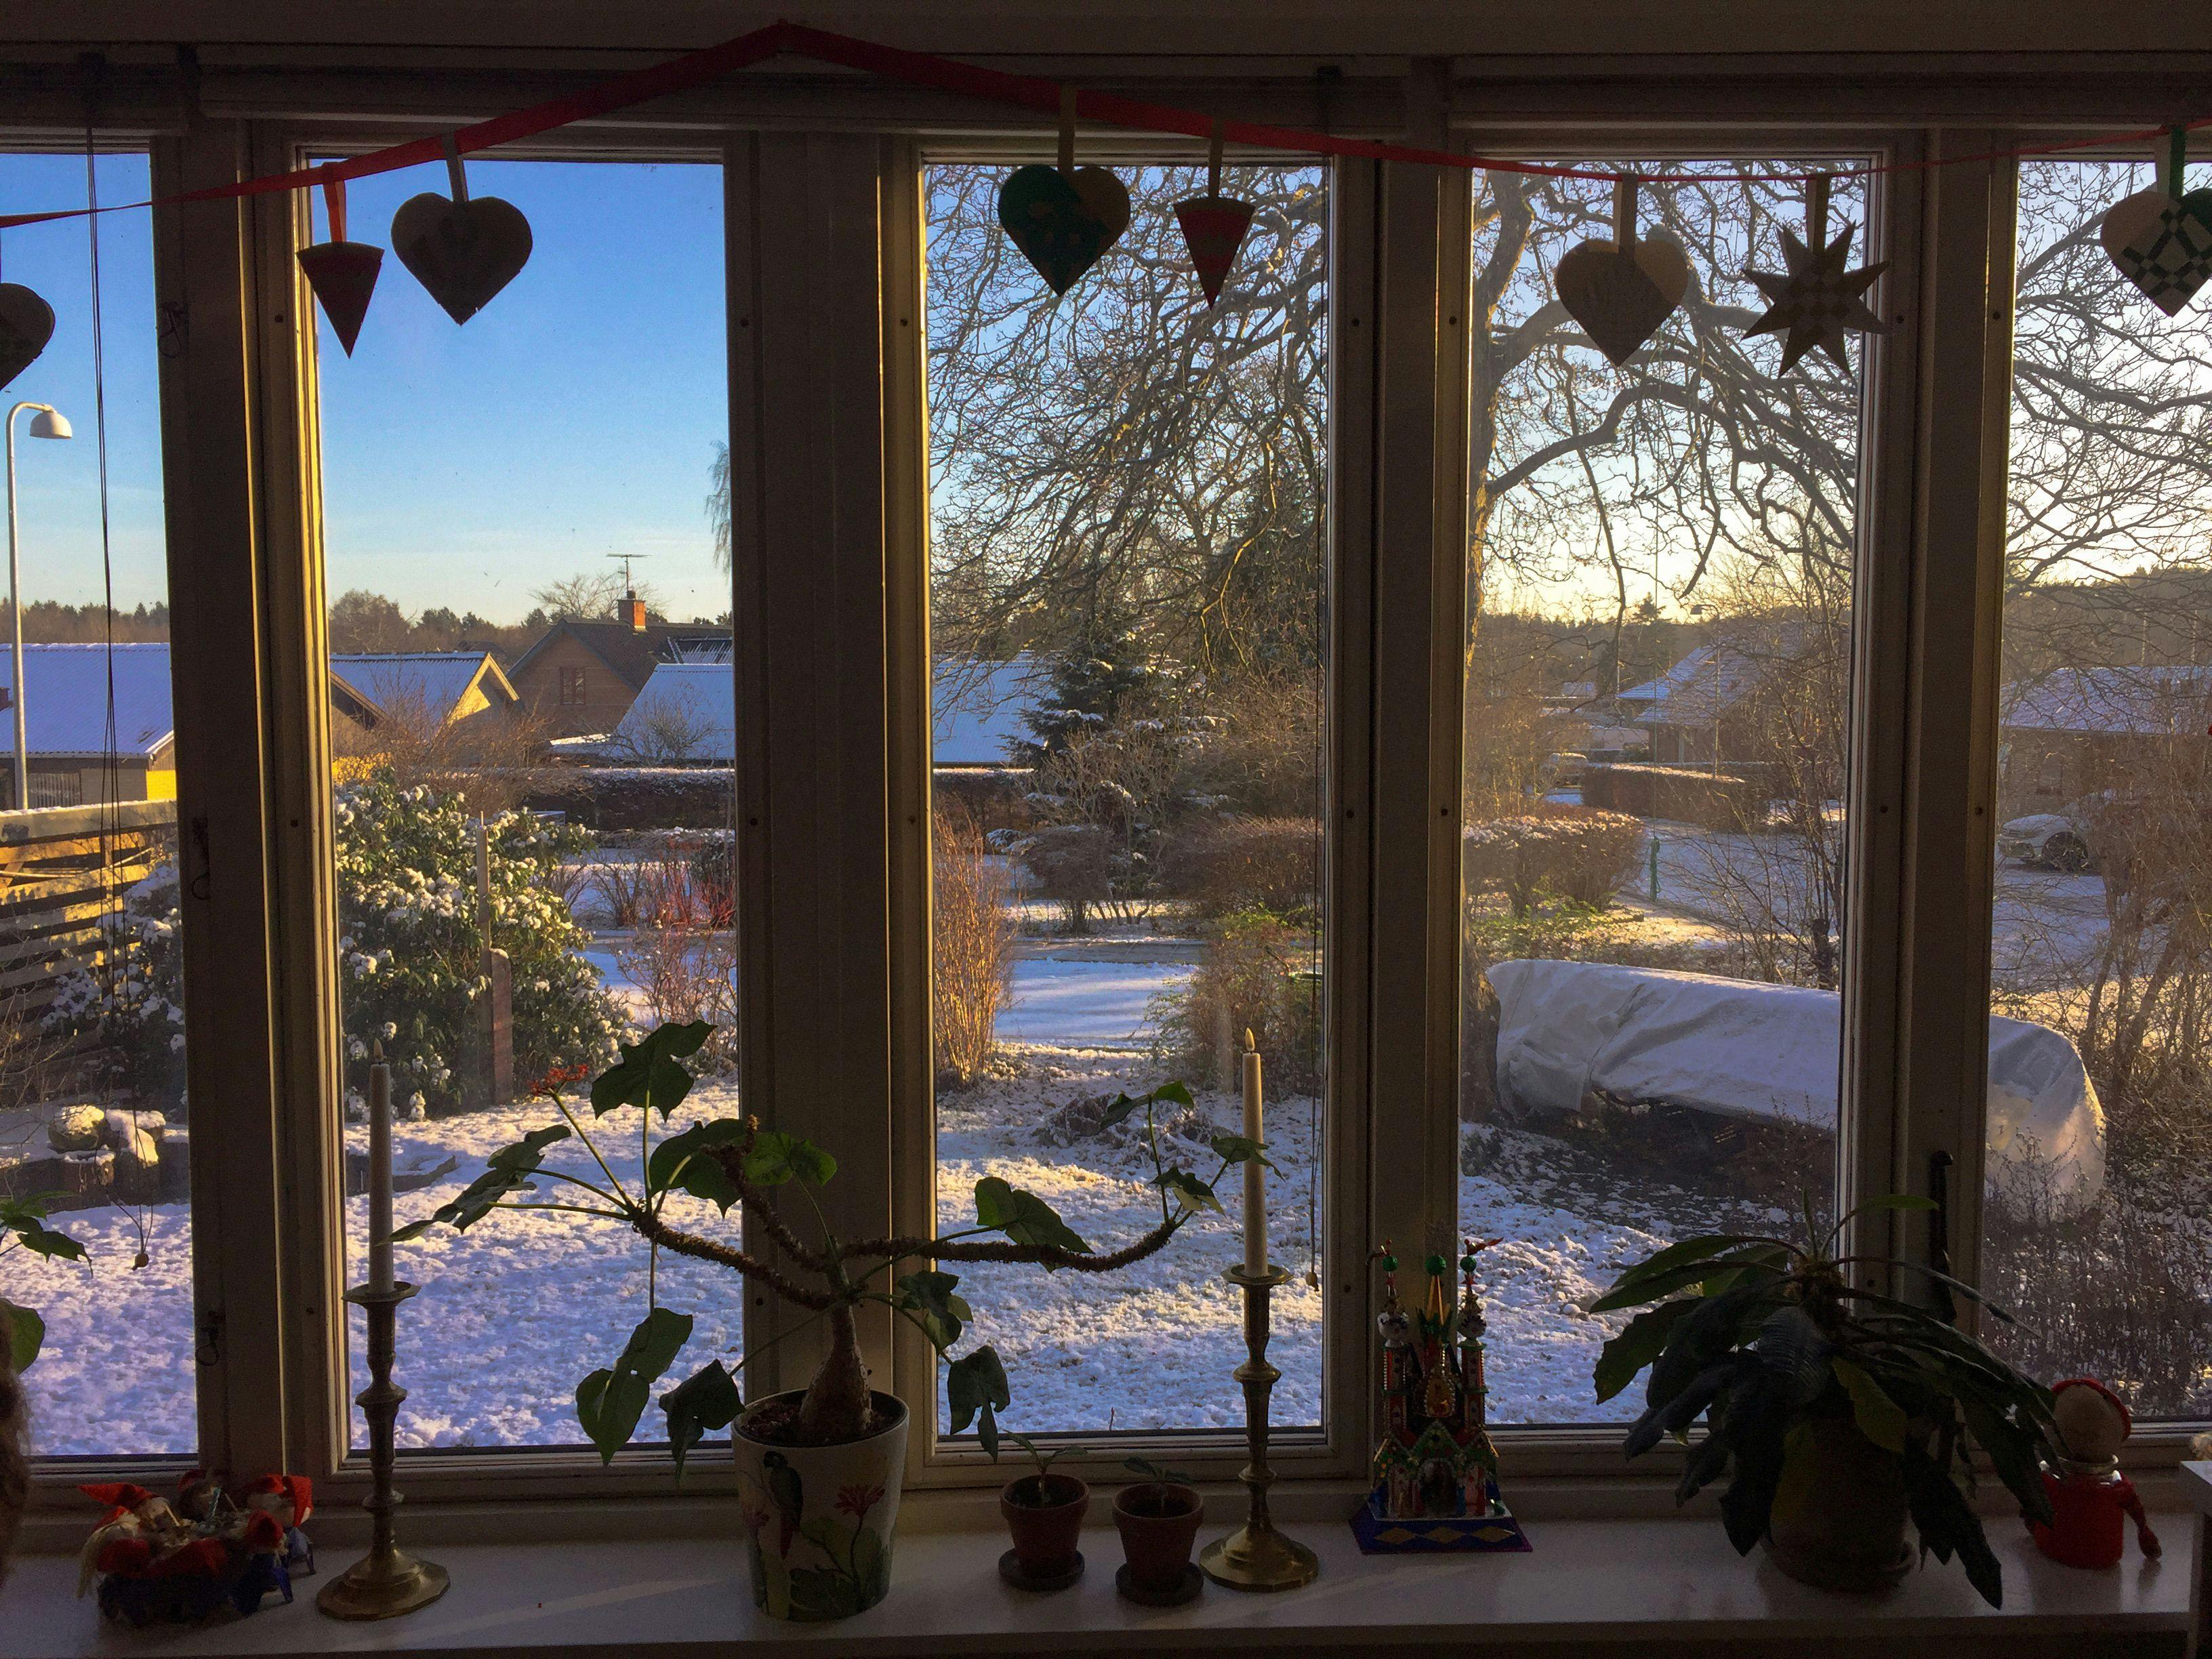 A window overlooking the garden reveals snow-covered houses adorned with star and heart-shaped Christmas decorations